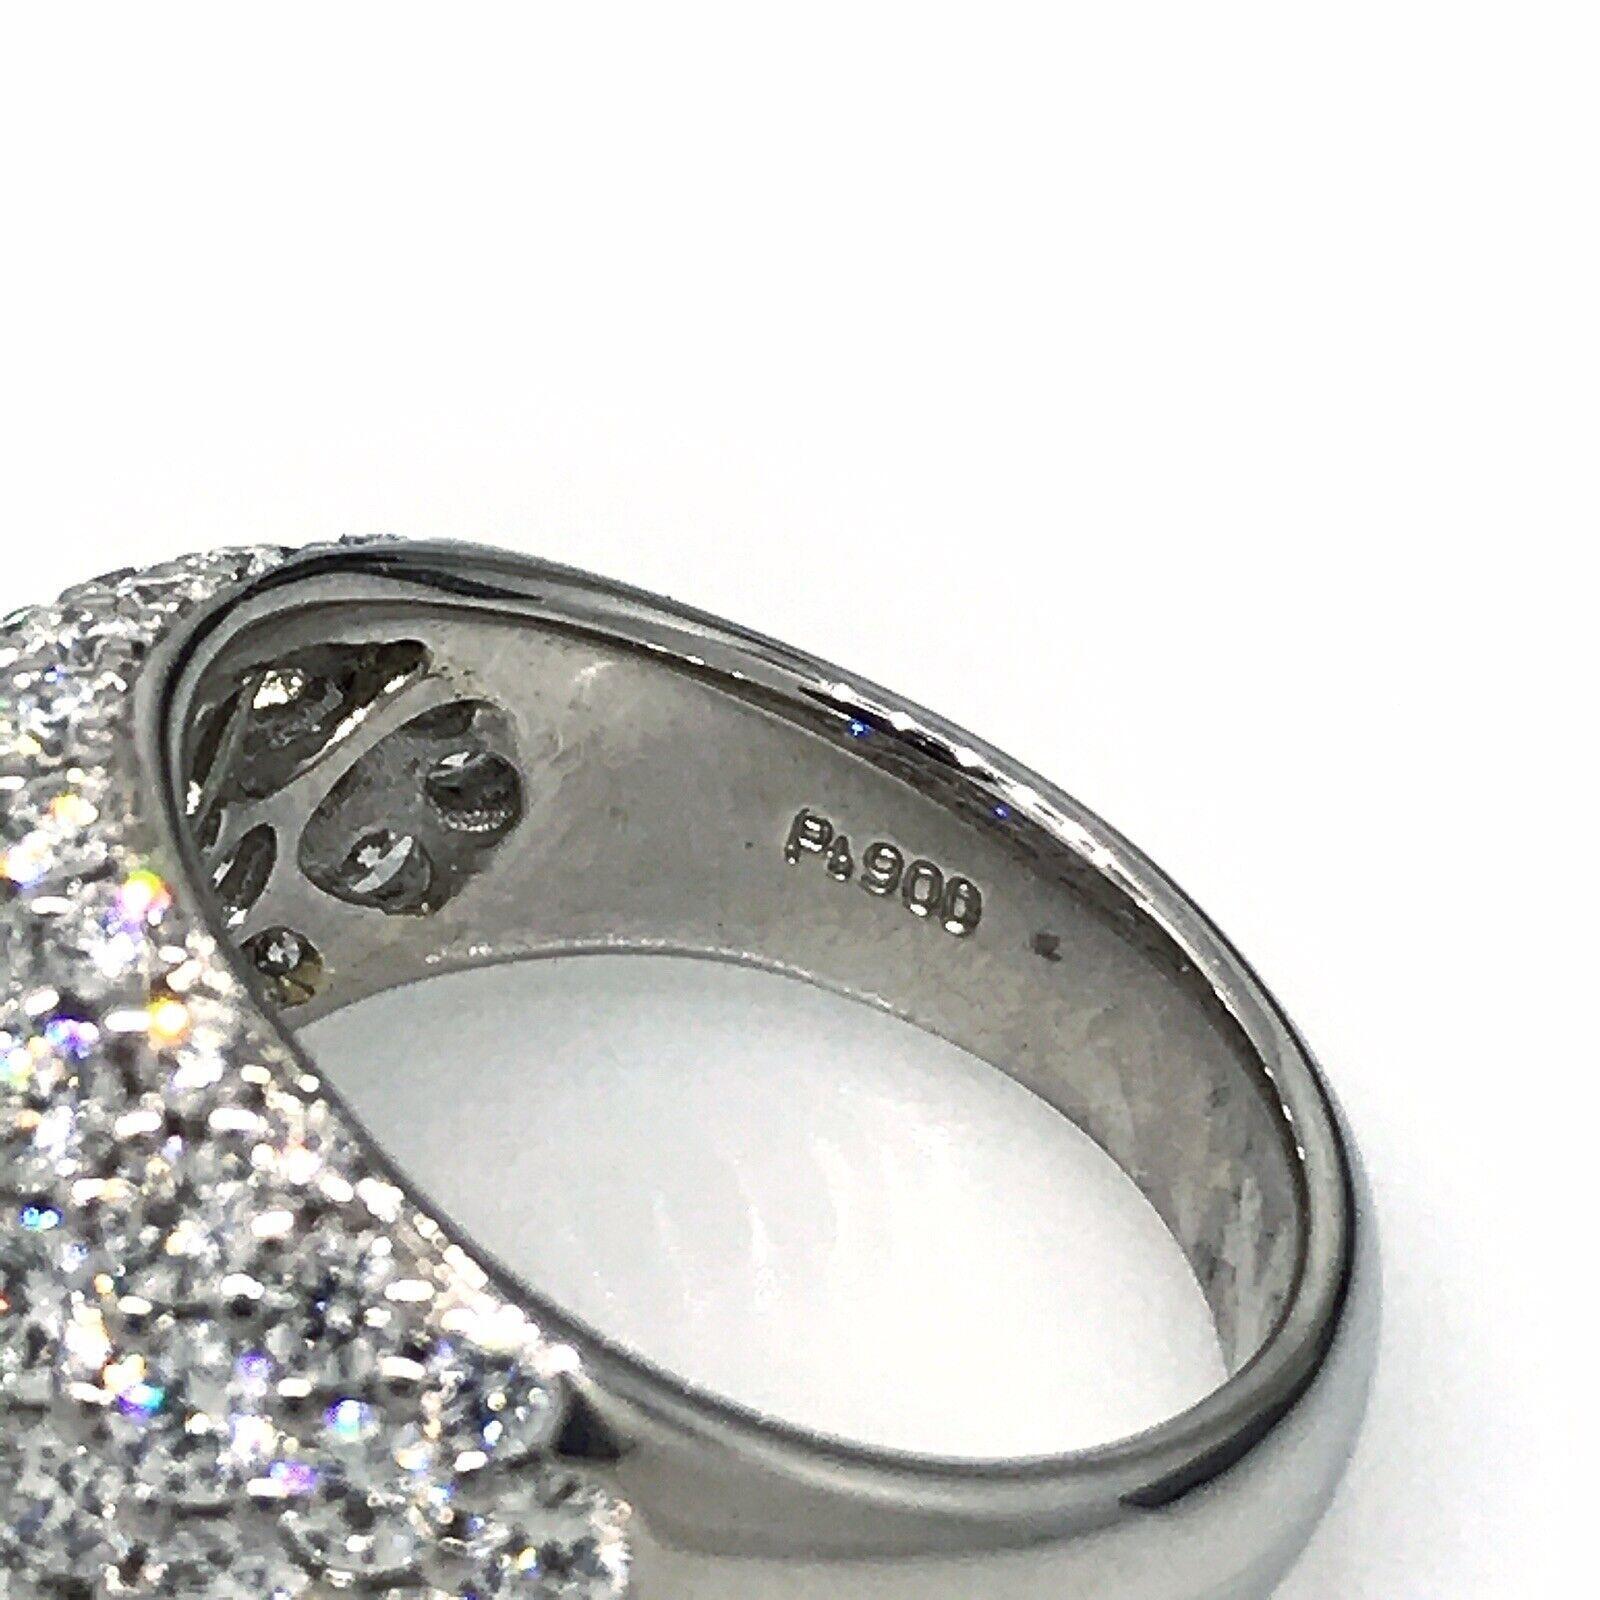 Women's or Men's 3.86 carat Pave Dome Diamond Cocktail Ring in Platinum For Sale